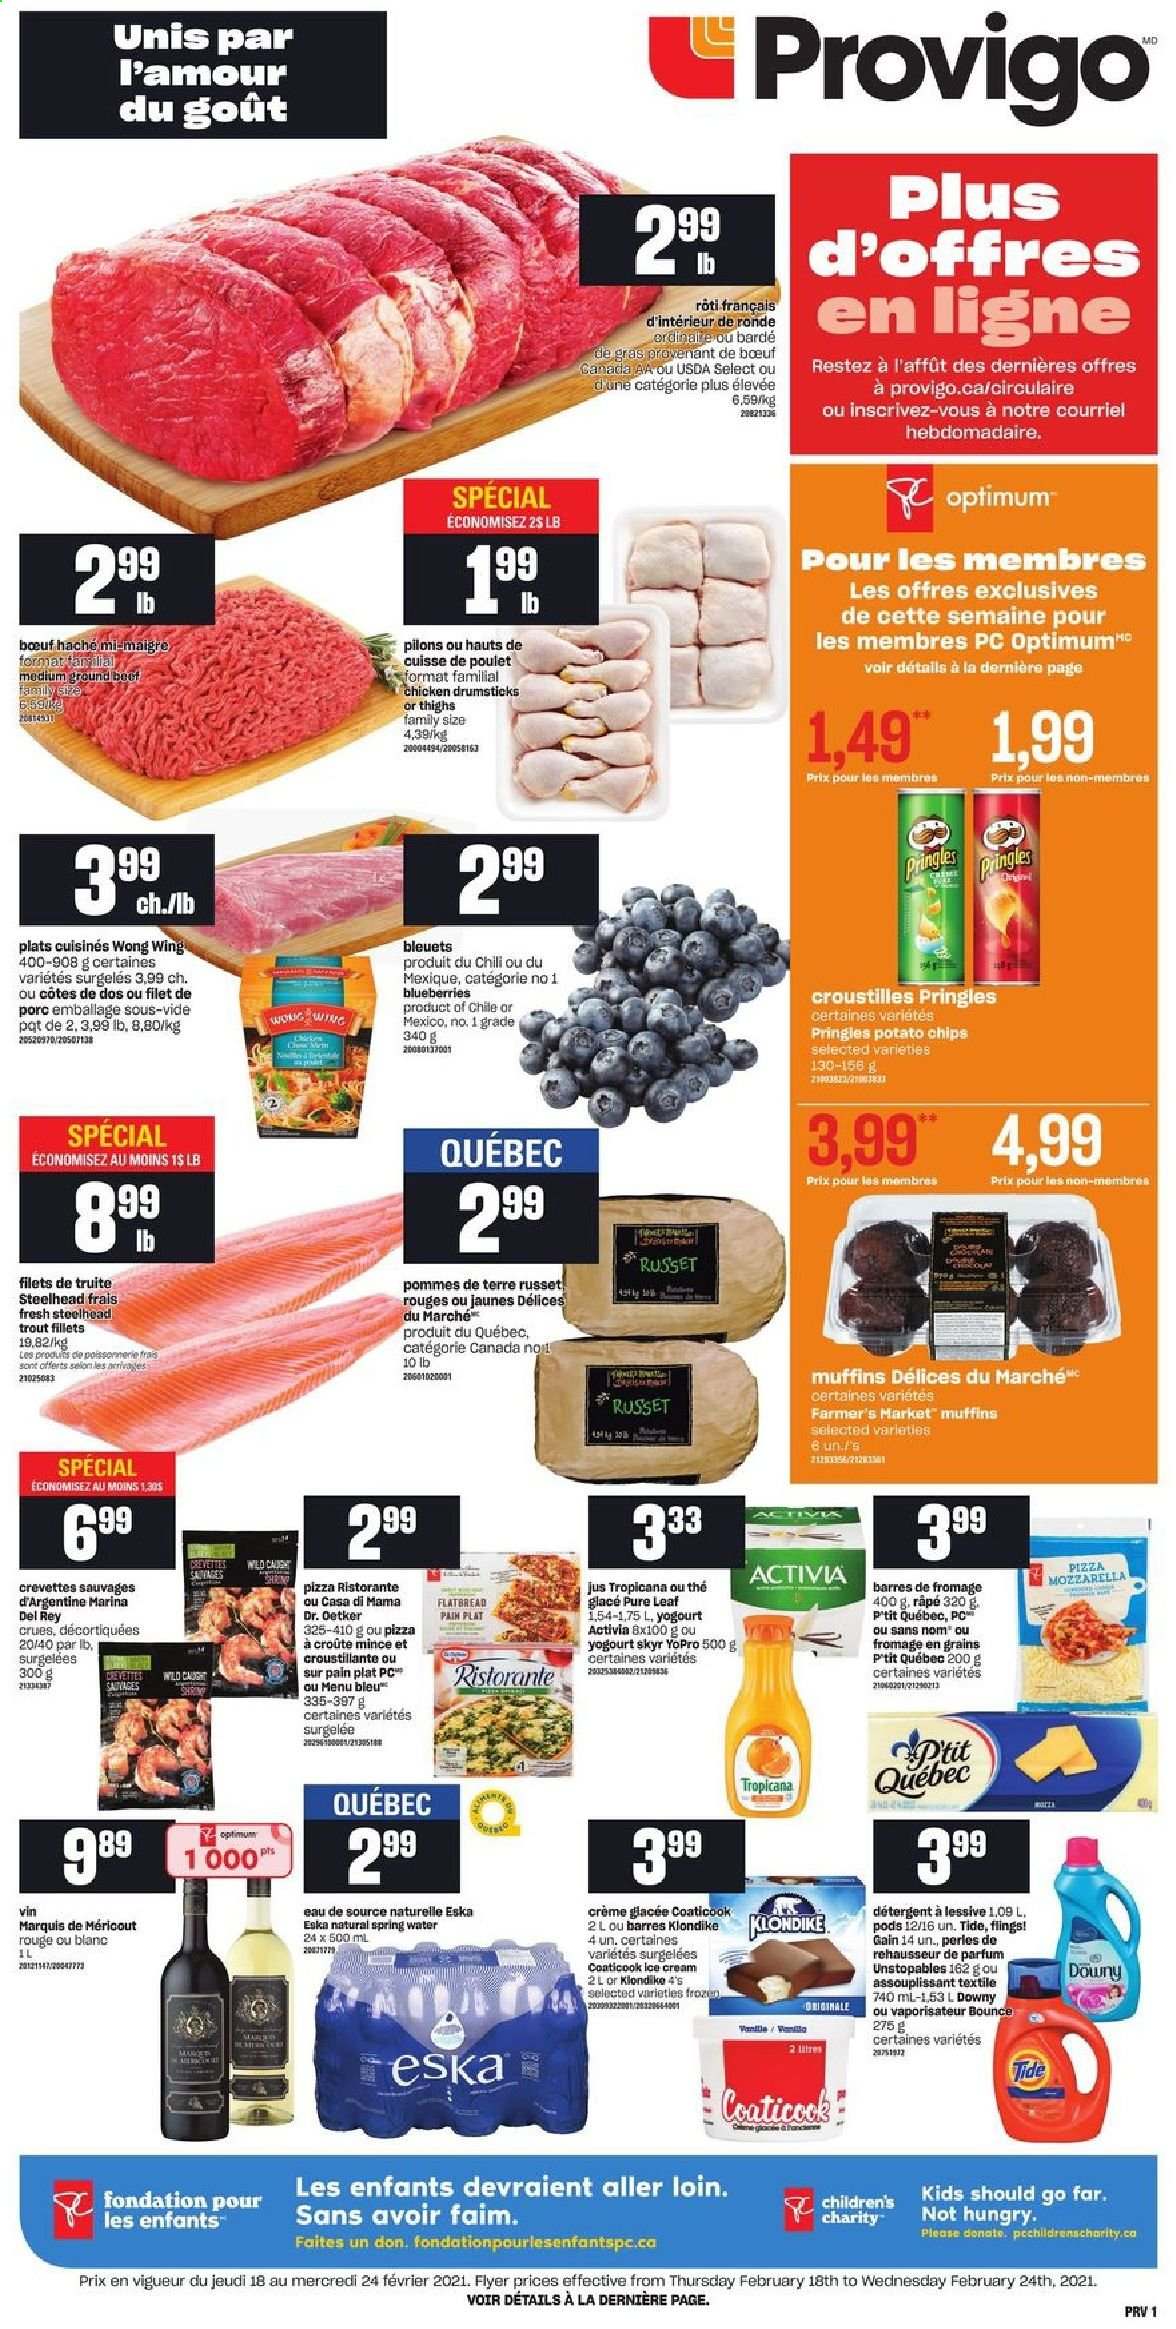 thumbnail - Provigo Flyer - February 18, 2021 - February 24, 2021 - Sales products - flatbread, muffin, russet potatoes, blueberries, trout, pizza, Dr. Oetker, Activia, ice cream, potato chips, Pringles, spring water, Pure Leaf, chicken drumsticks, chicken, Gain, Tide, Unstopables, Bounce, chips. Page 1.